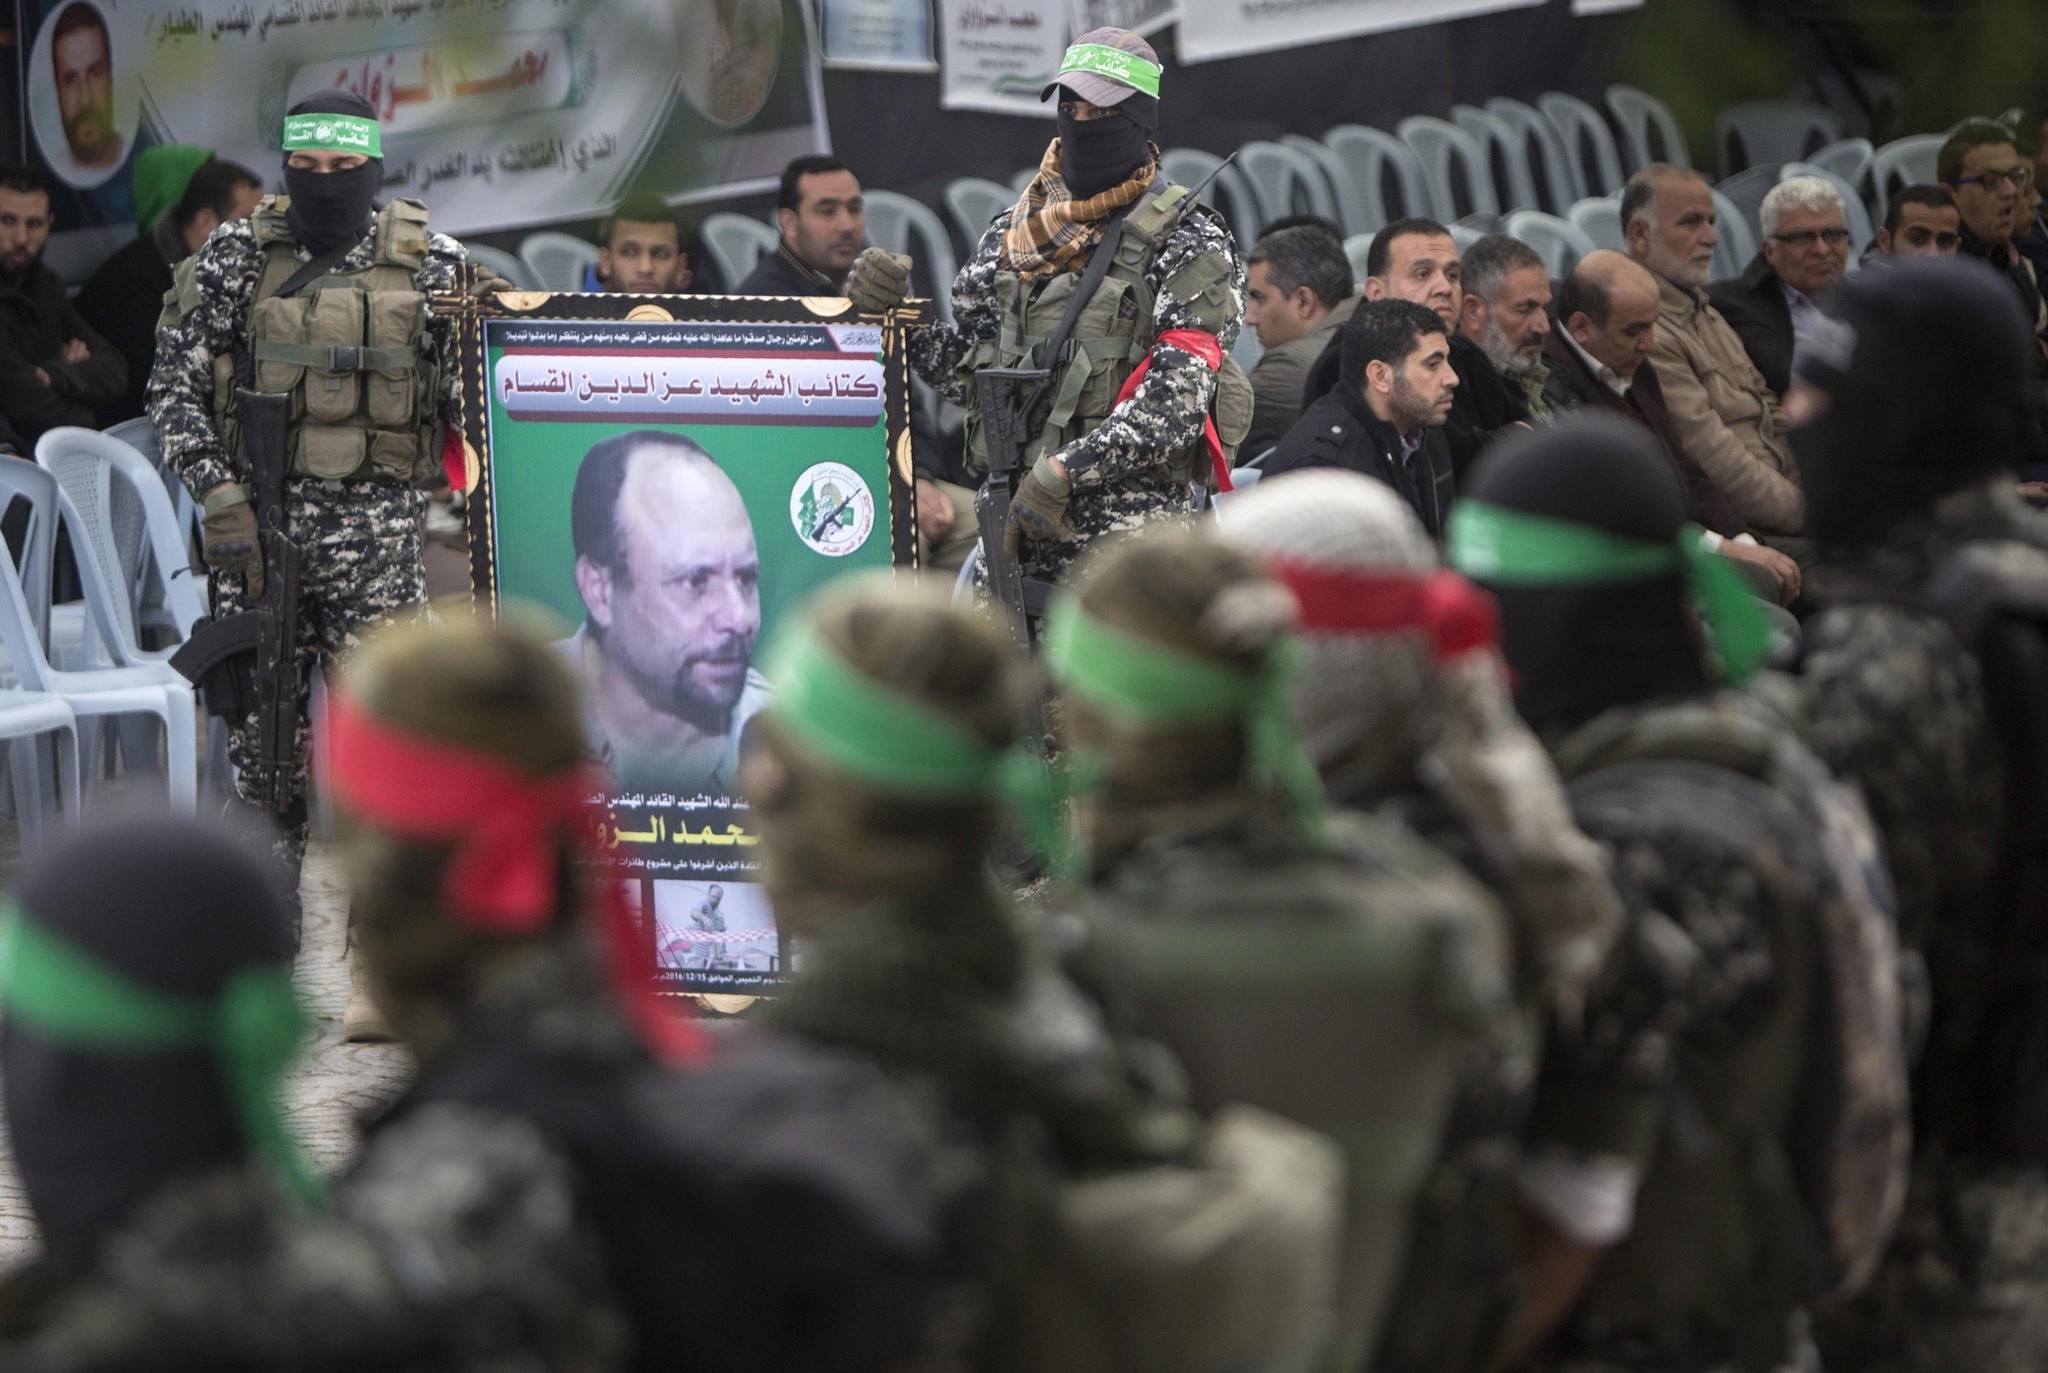 Members of the Ezzedine al-Qassam Brigades hold a banner bearing a portrait of one of their leaders, Mohamed Zaouari. (AFP Photo)